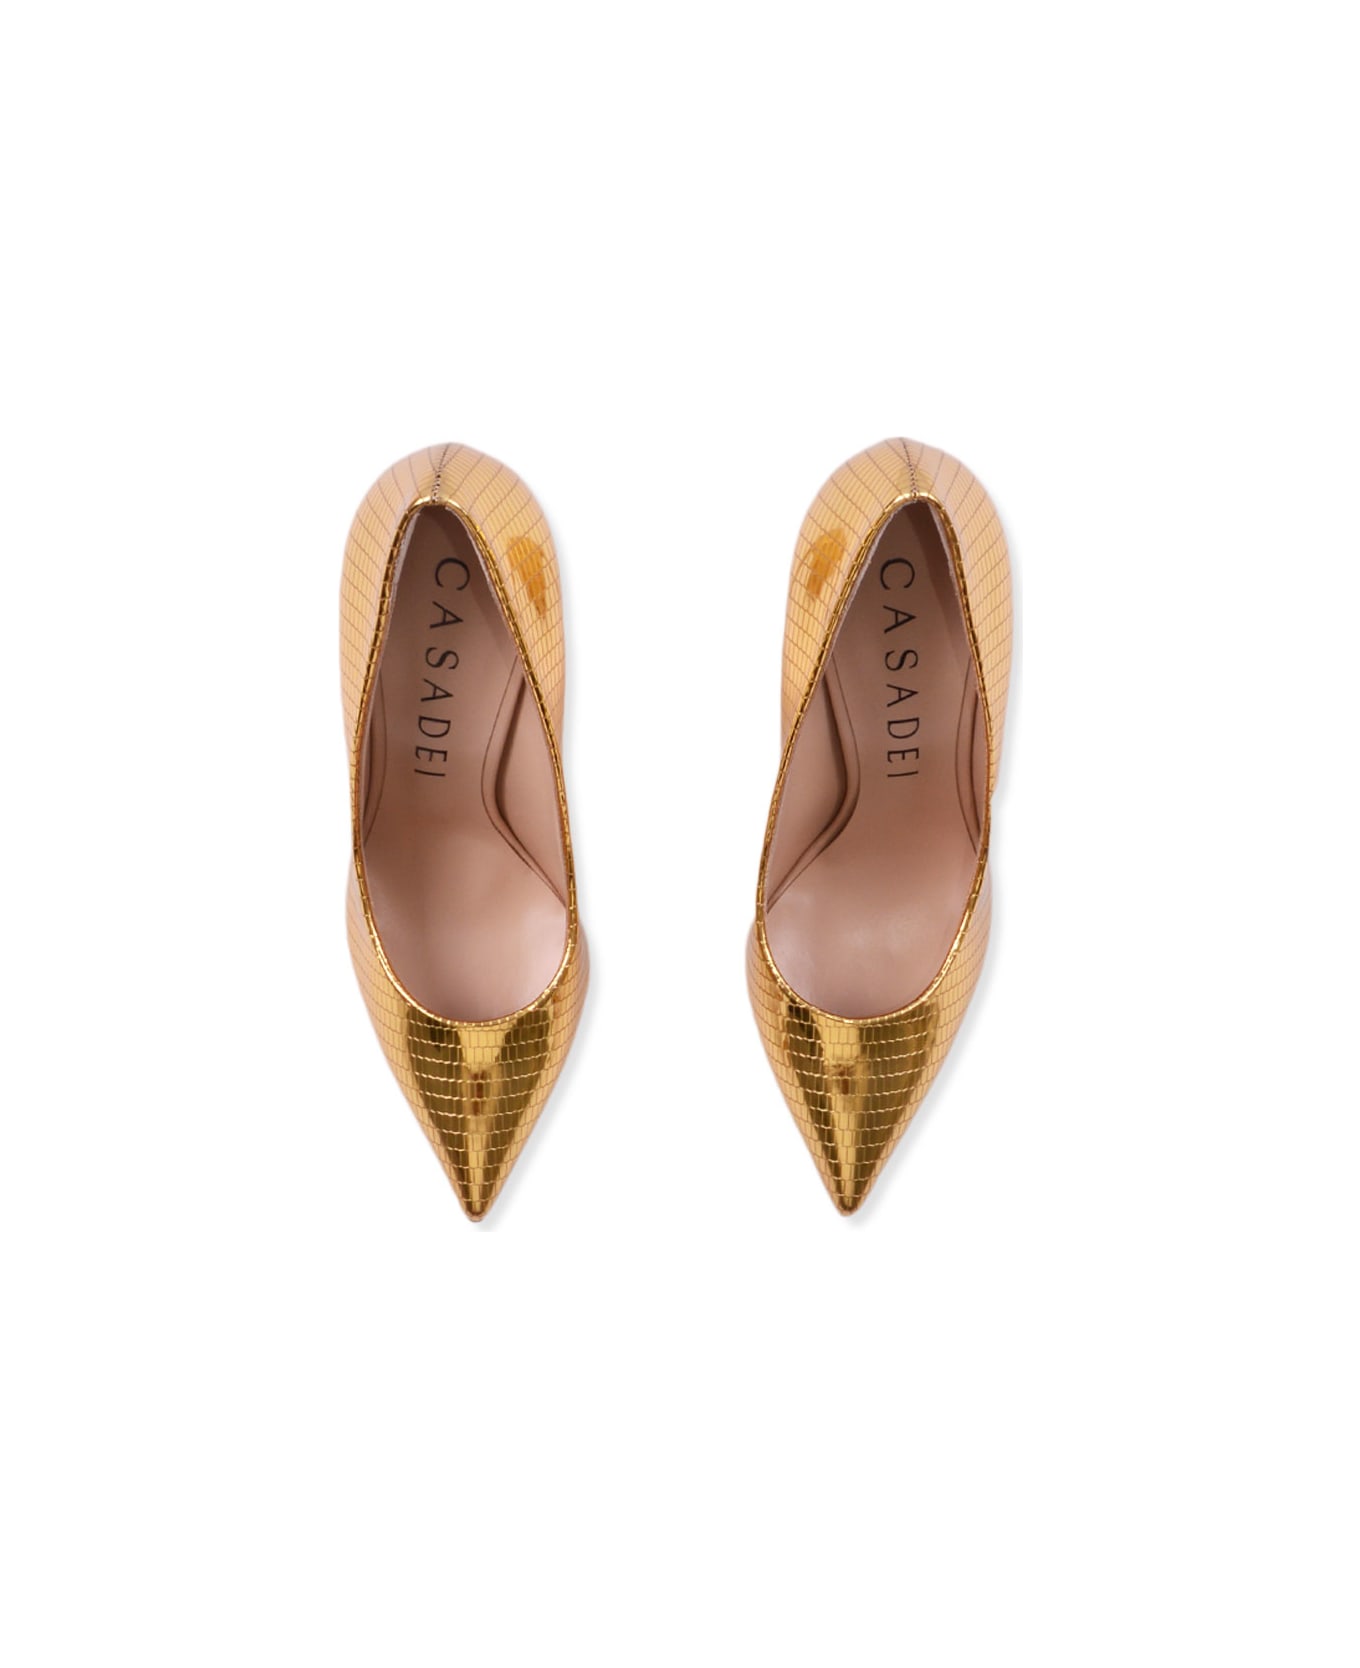 Casadei Shoes With Heels - Golden ハイヒール